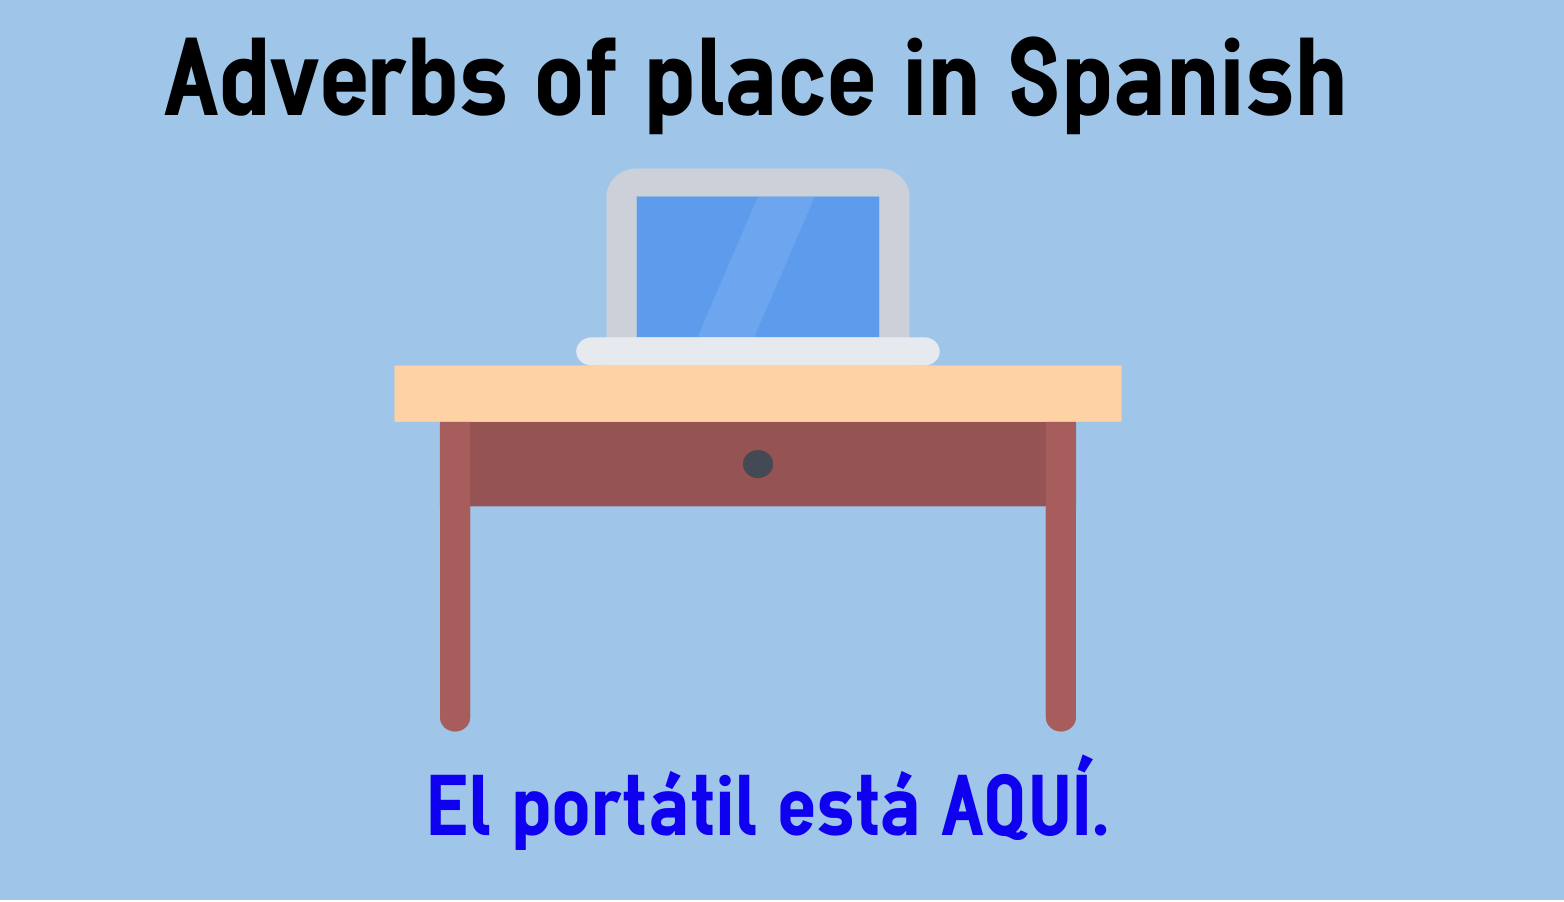 adverbs-of-place-in-spanish-aqu